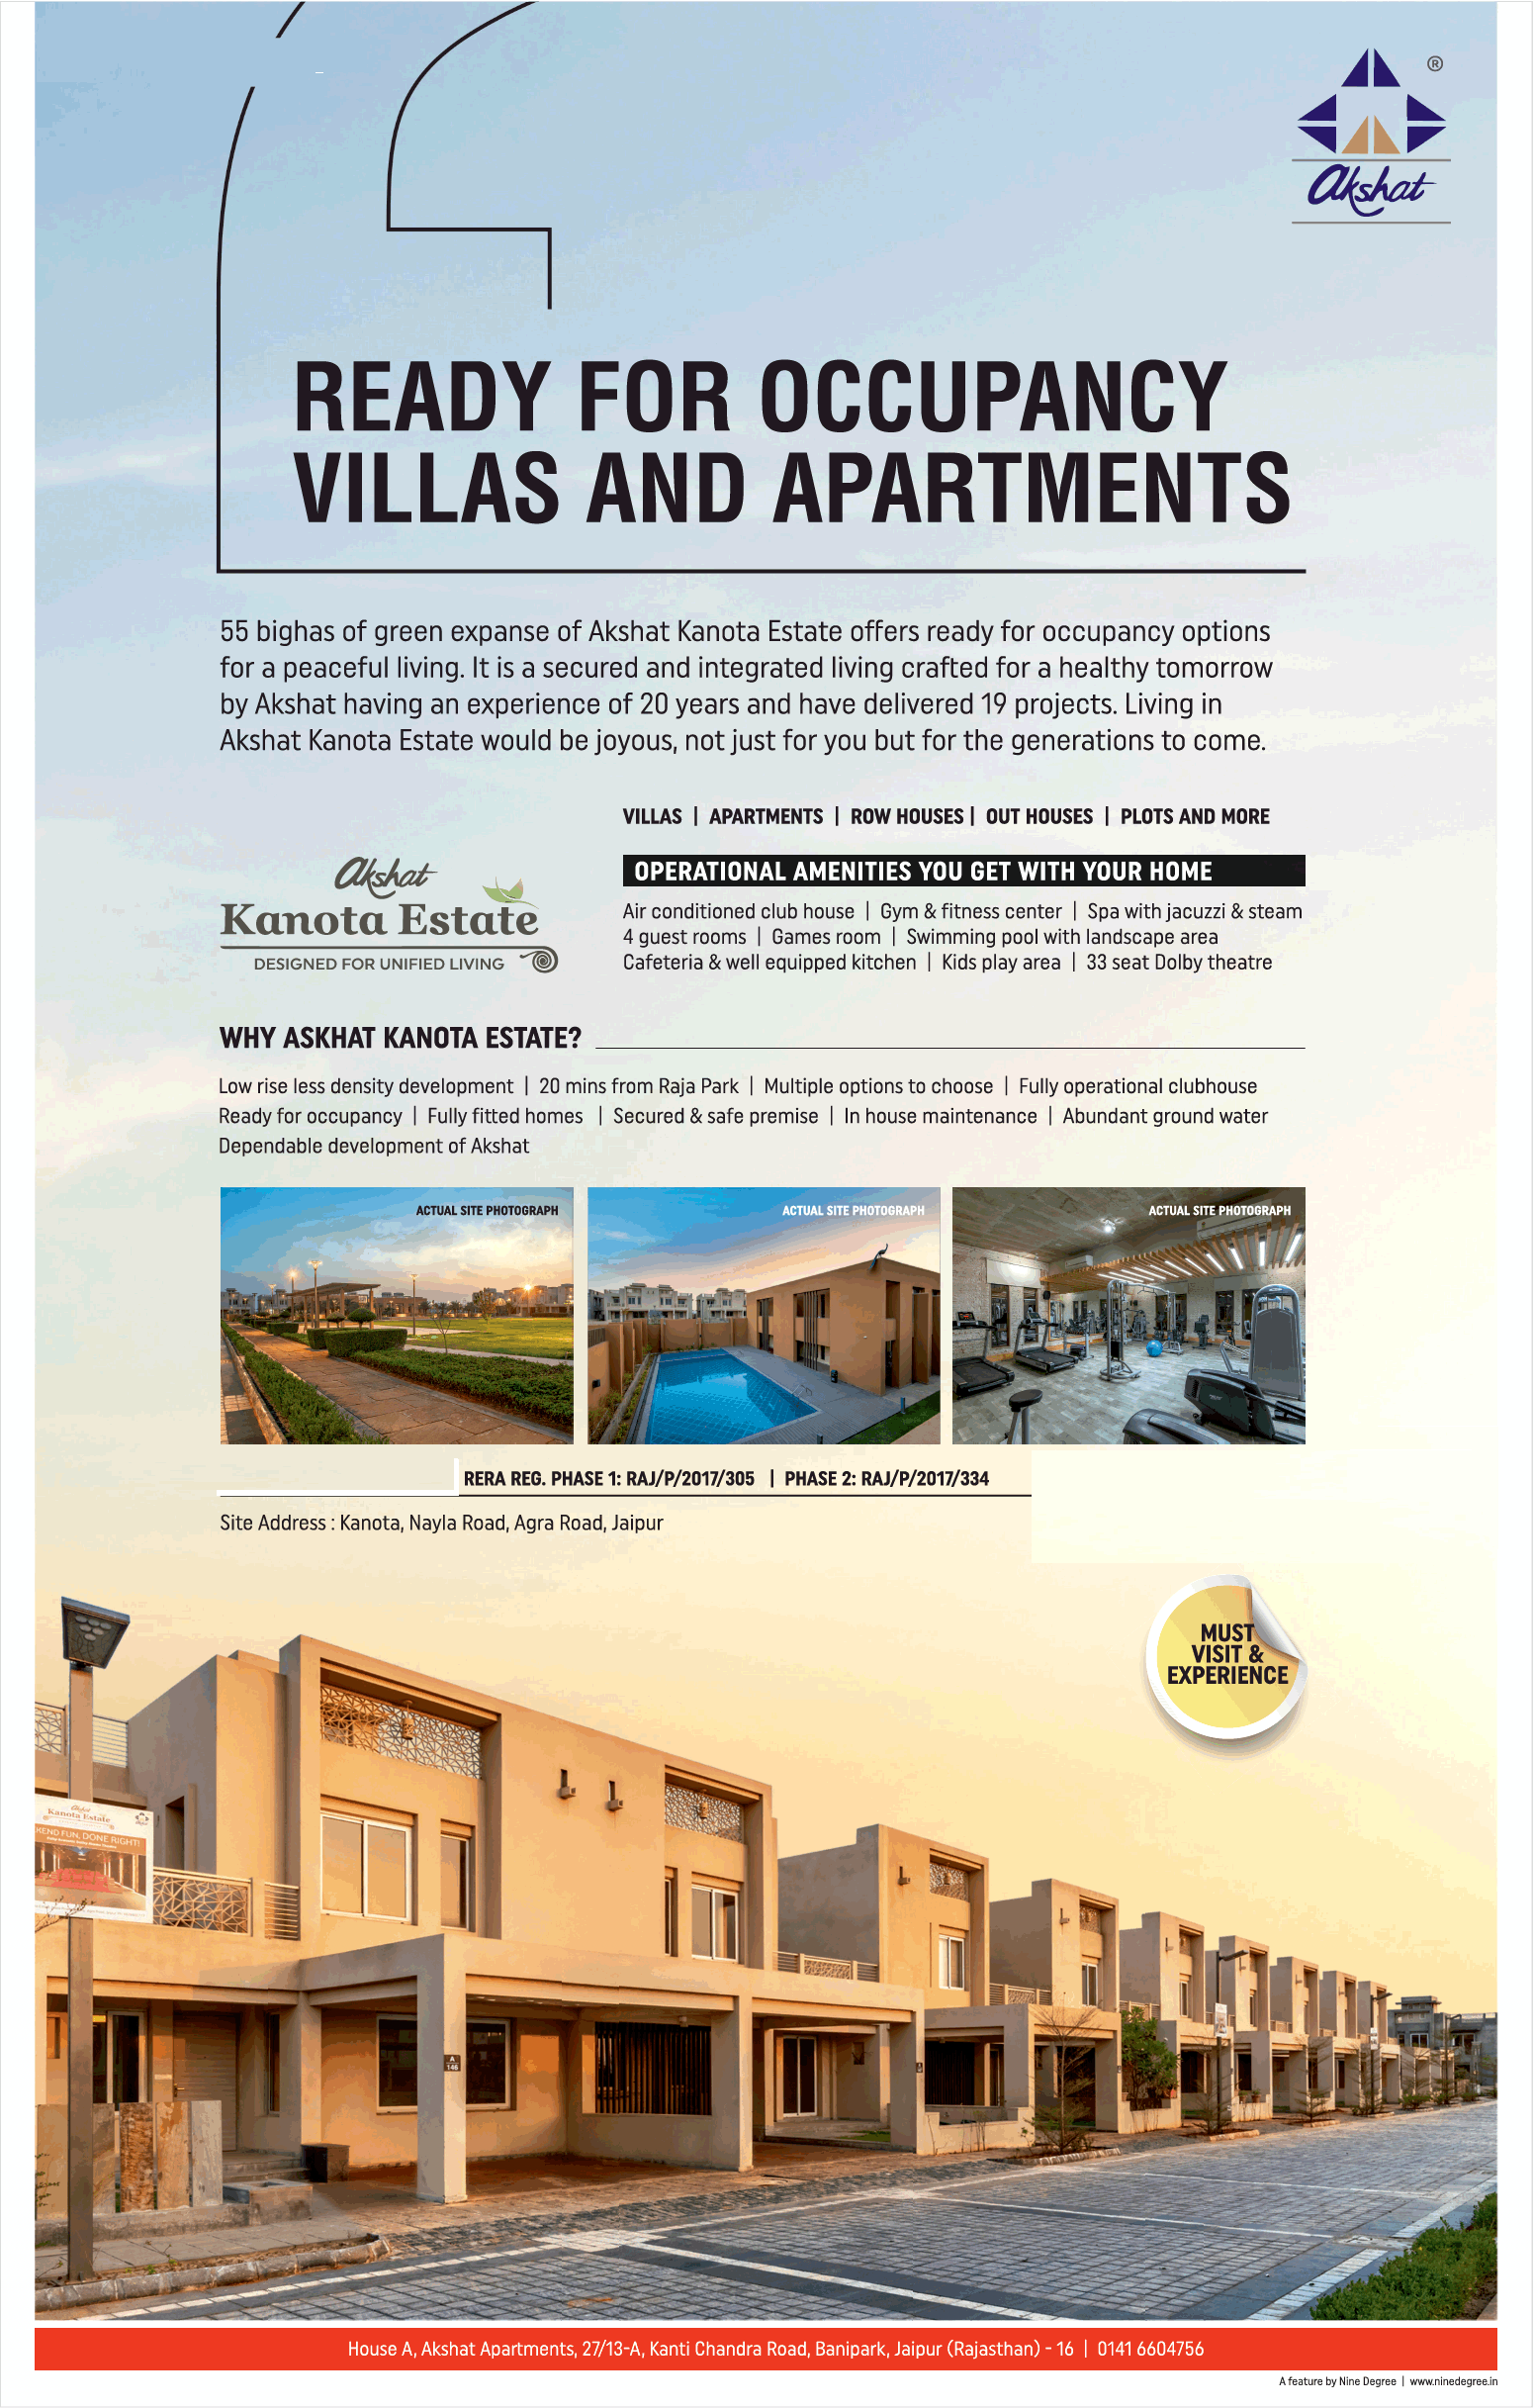 Ready for occupancy in villa and apartment at Akshat Kanota Estate, Jaipur Update